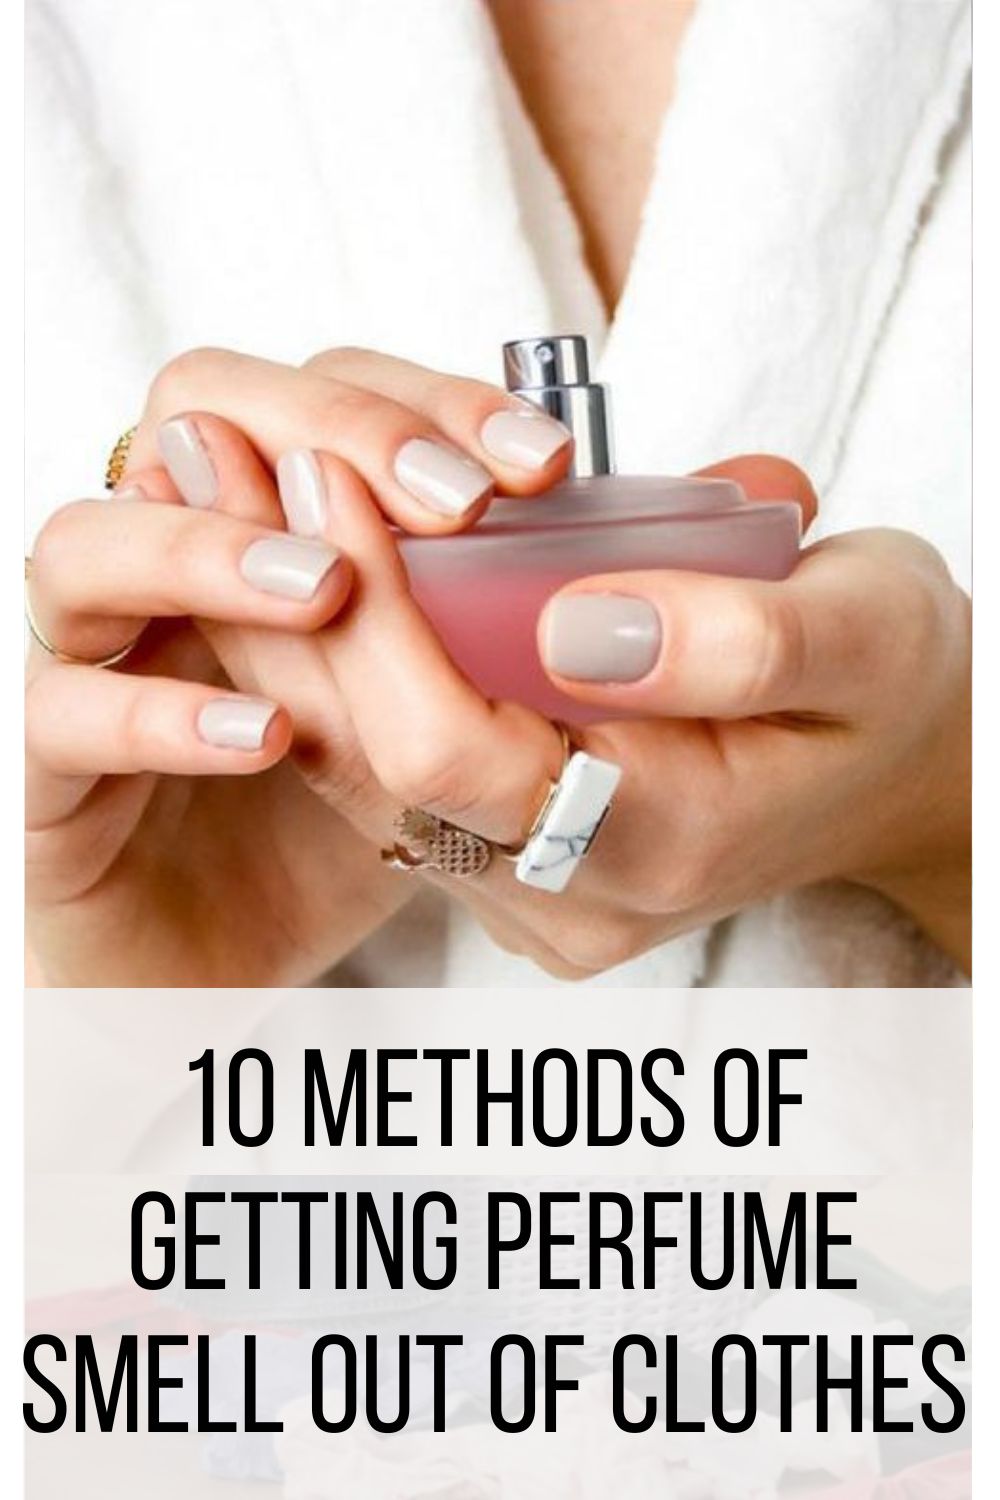 10 Methods Of Getting Perfume Smell Out Of Clothes